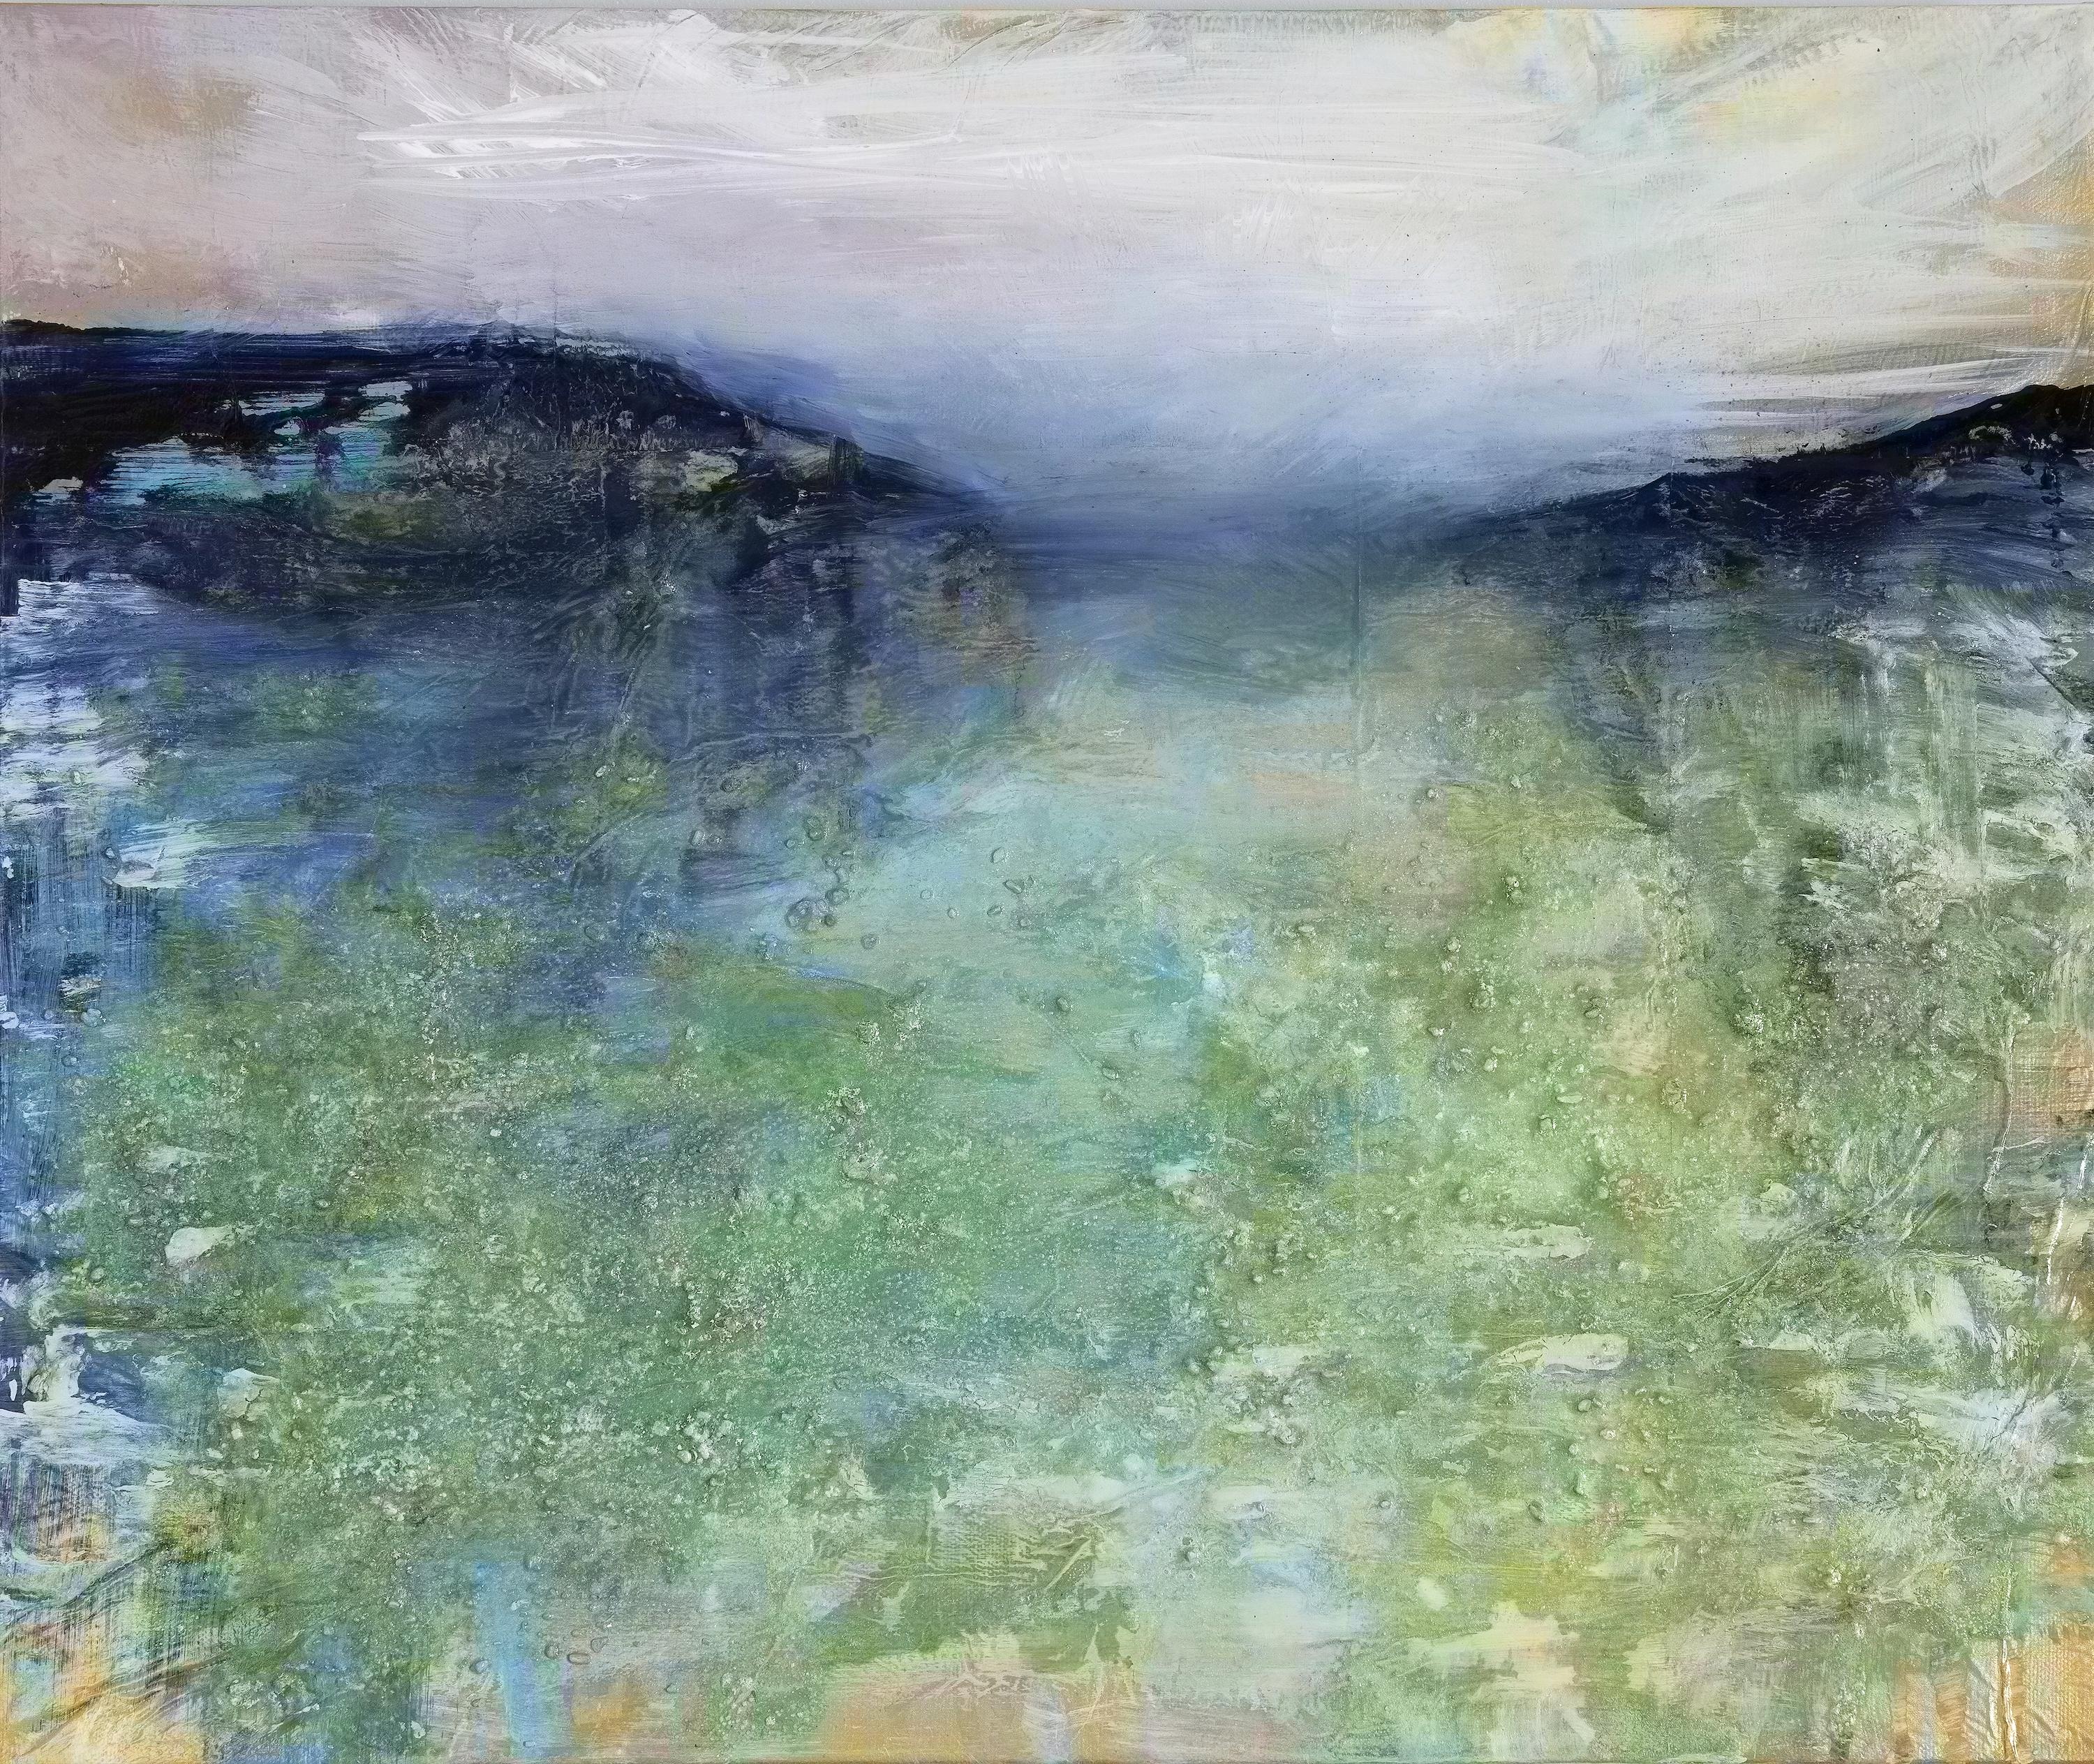 Precipice, Original Contemporary Abstract Landscape Painting on Canvas
20x24 (HxW), Mixed Media

Another abstract landscape study by artist Julia Di Sano, this nature-inspired painting features a soft color palette of deep blues, creams, and green